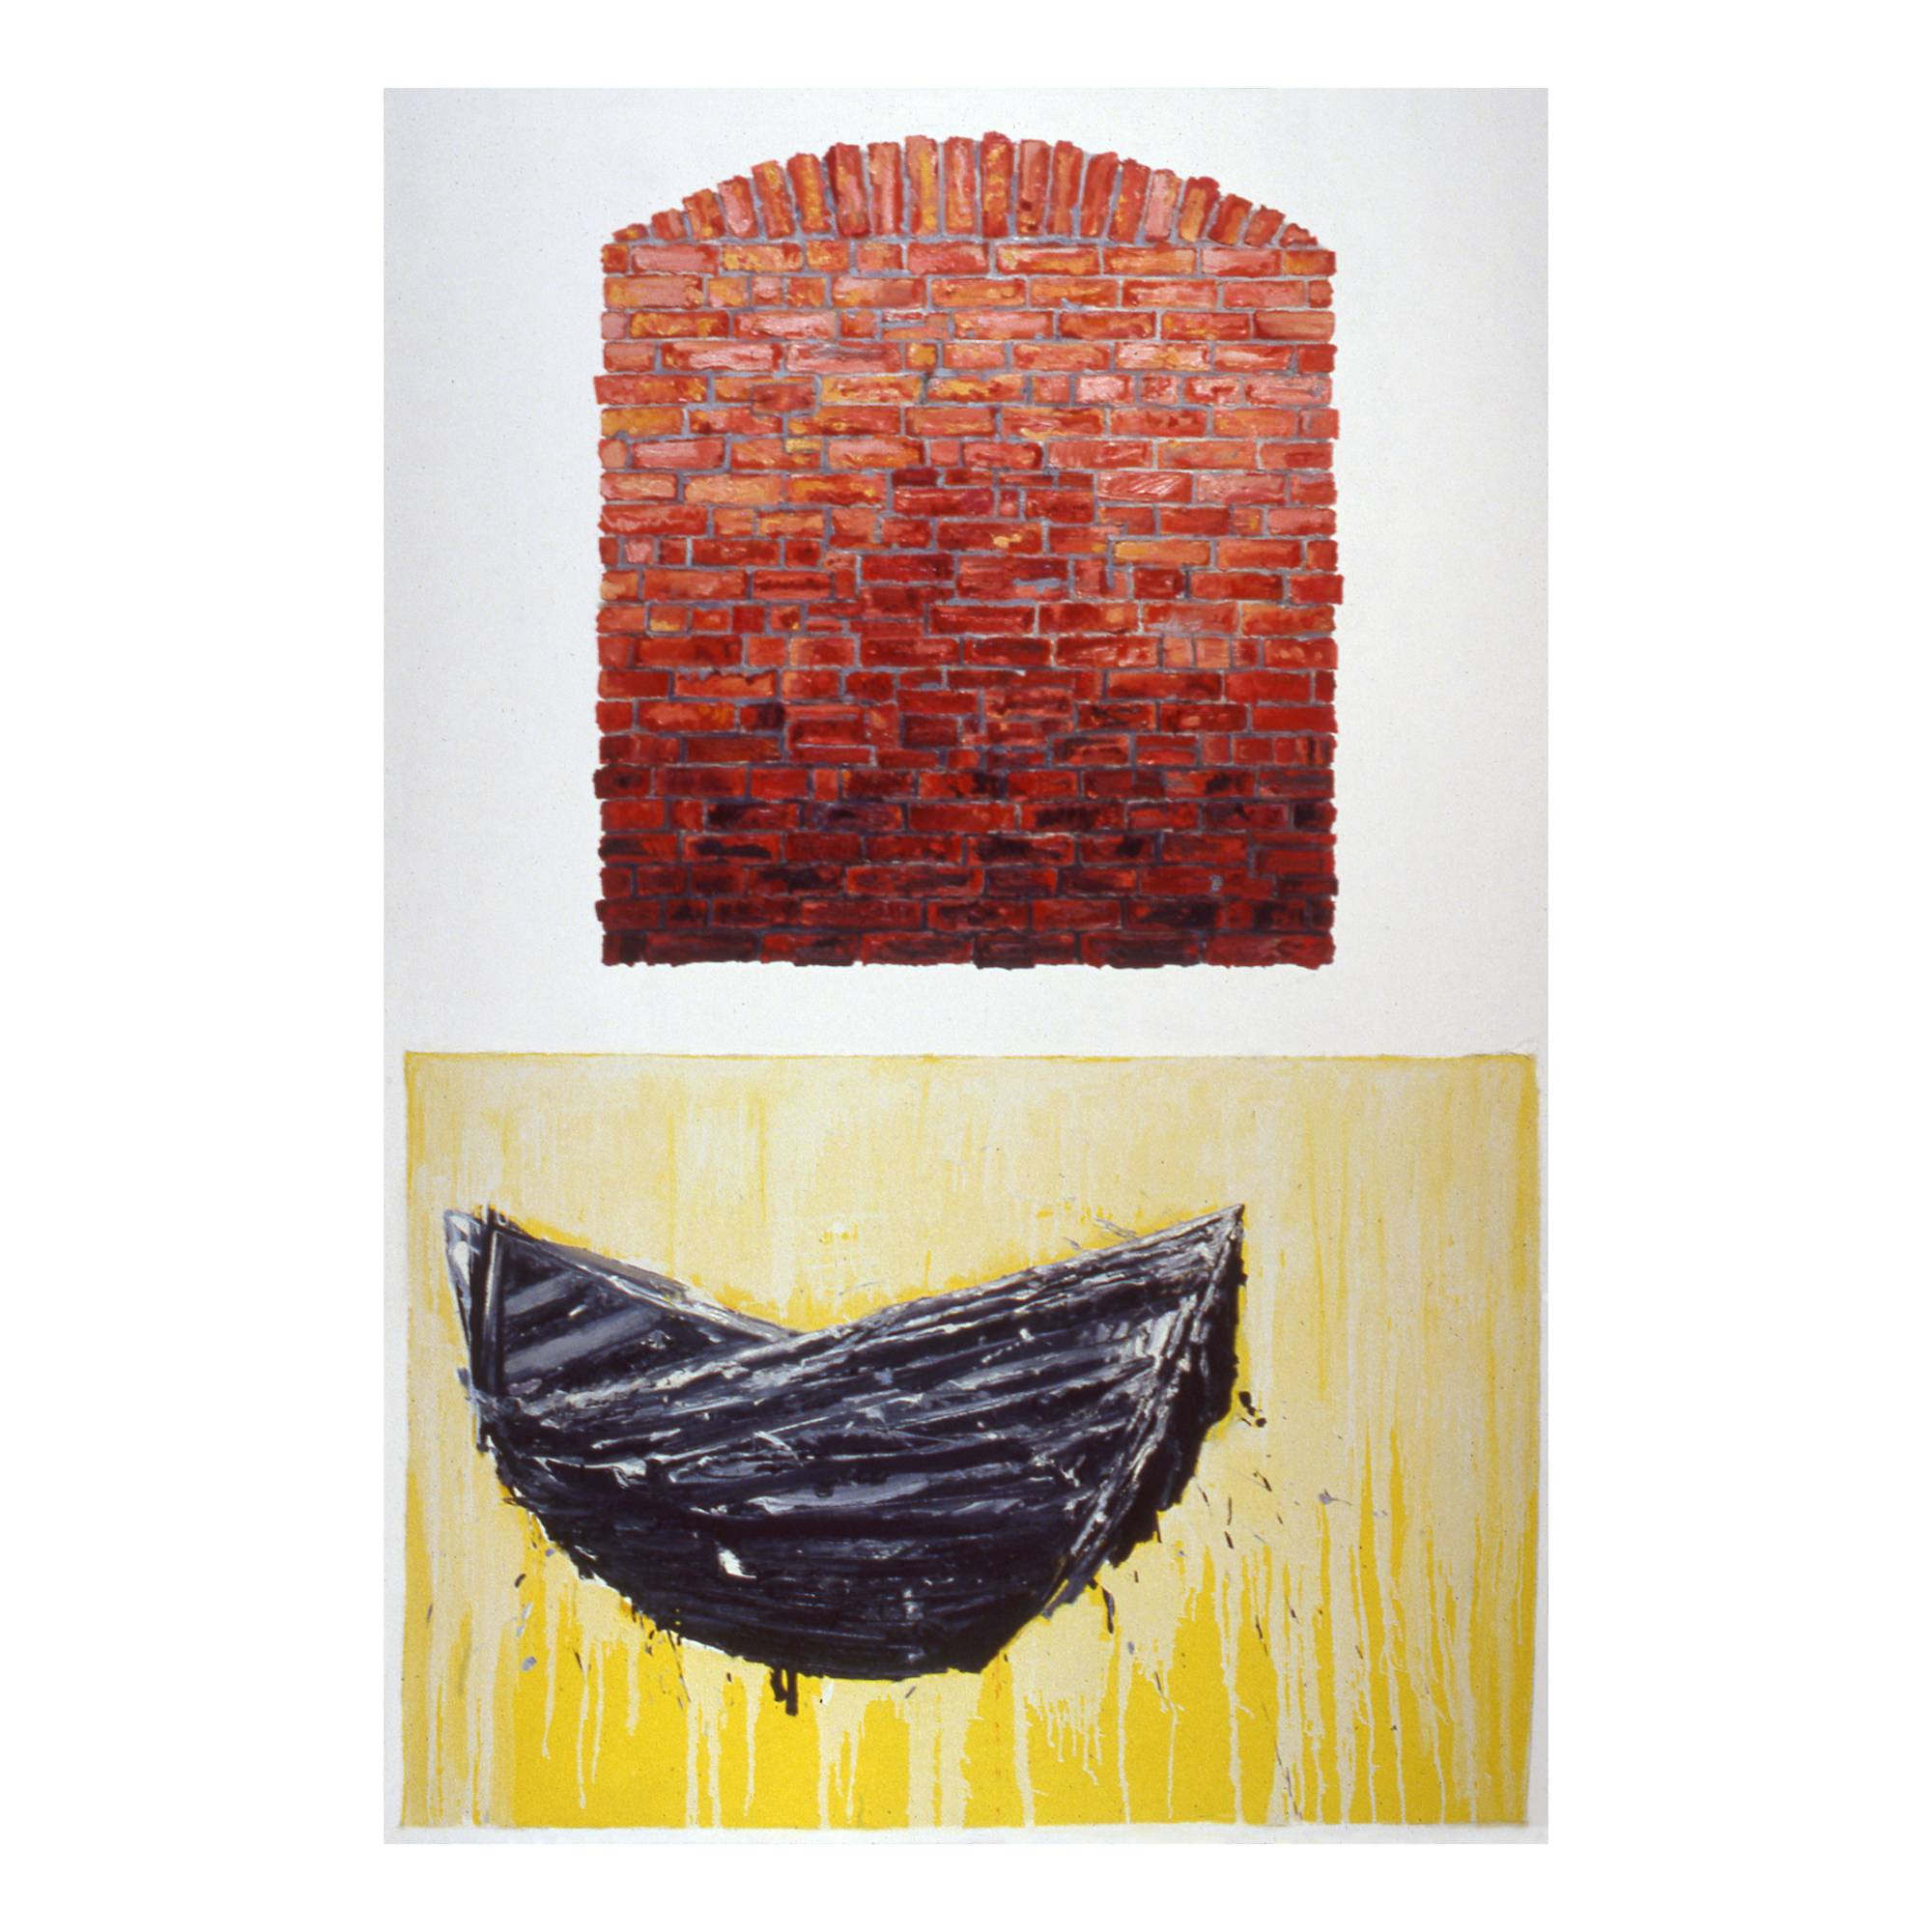 A painting by Vera Klement titled 'Lifeboat' depicting a blank red brick wall on a white background, beneath is an expressively painted lifeboat on a yellow background